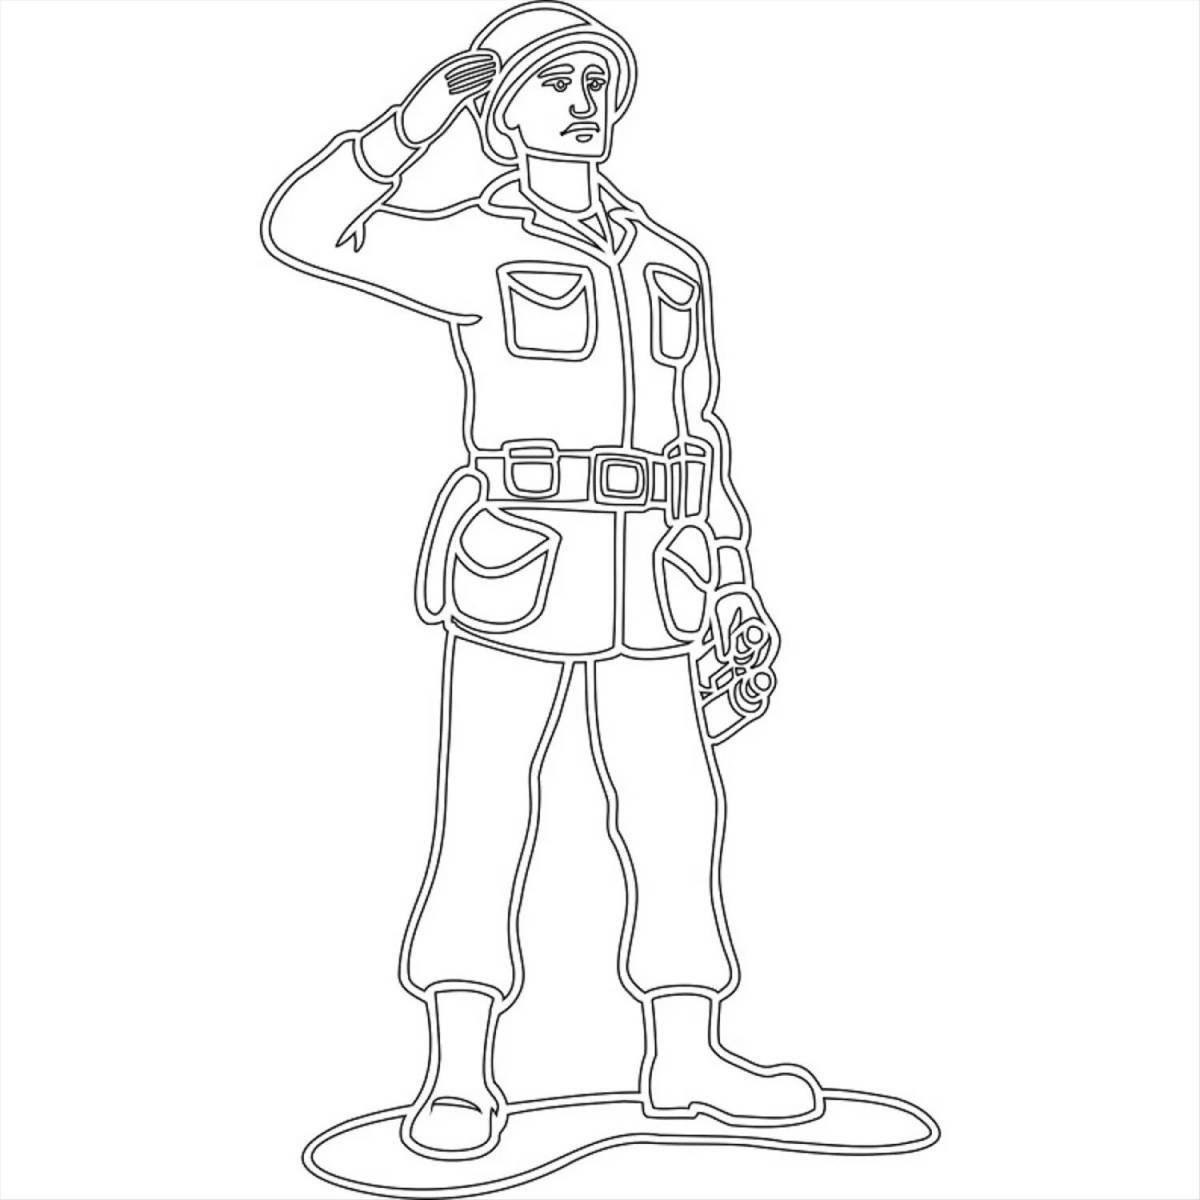 Bright military drawing for kids